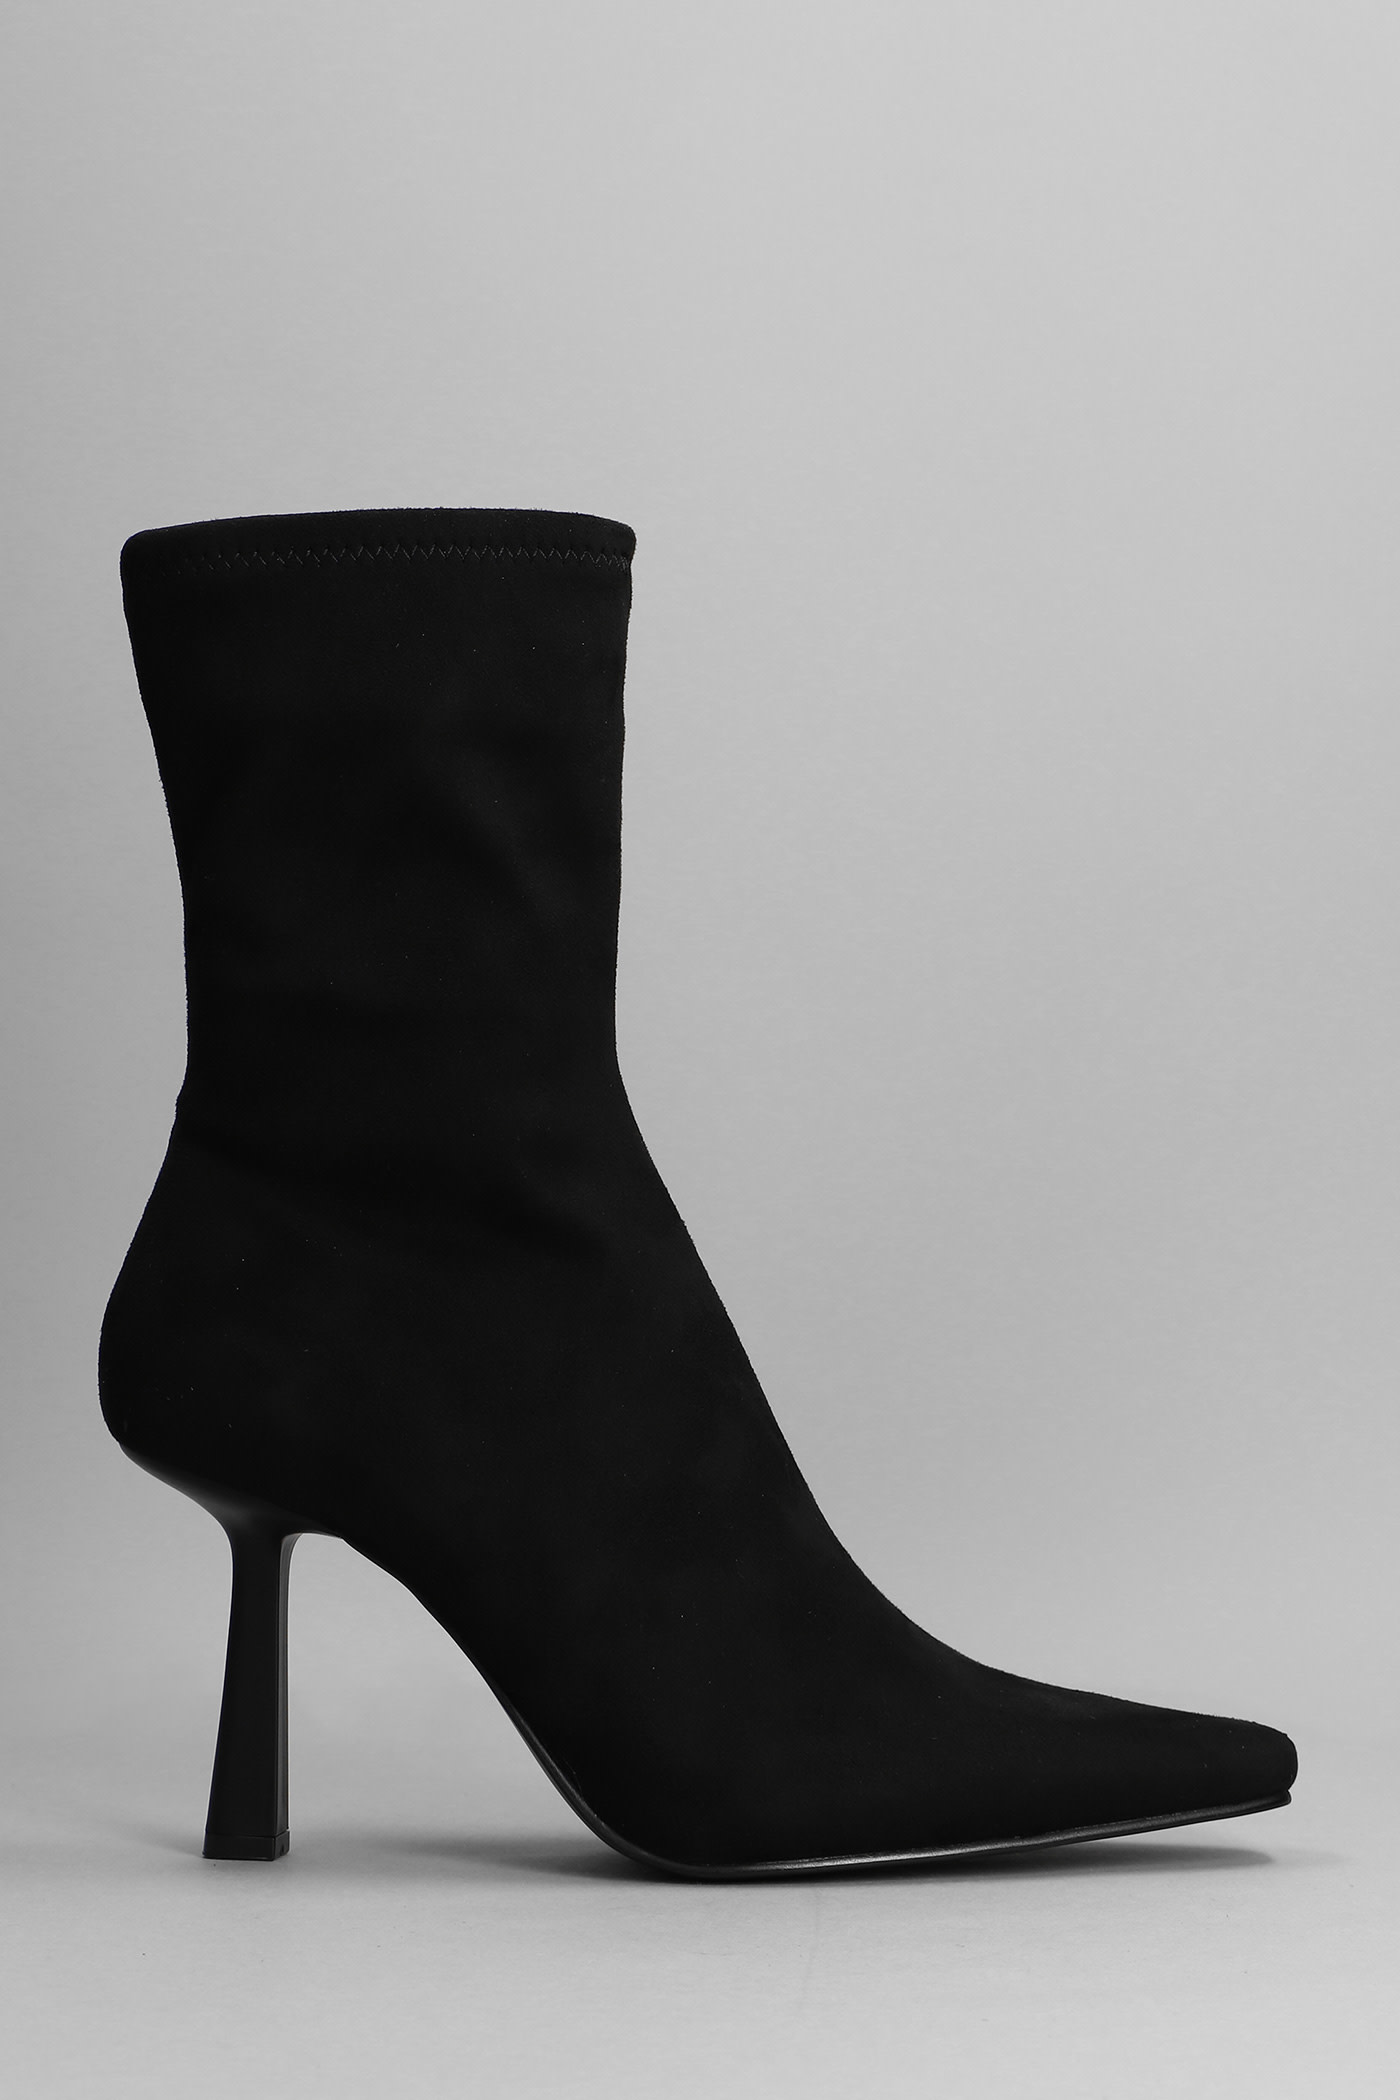 Steve Madden Vakay High Heels Ankle Boots In Black Suede